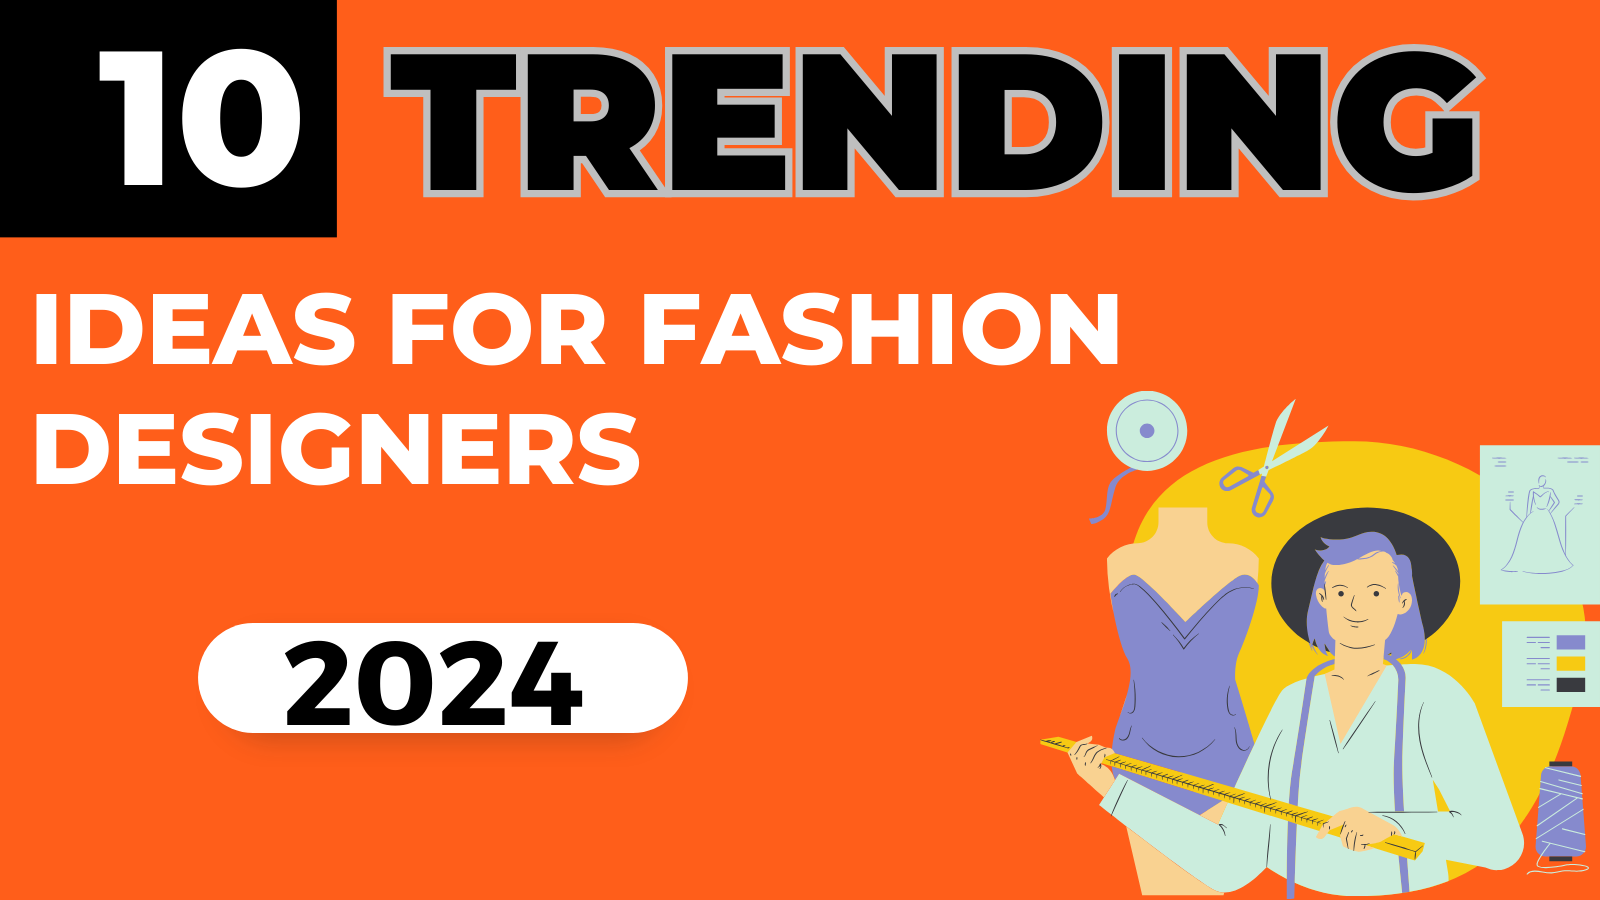 10 Trending Ideas For Fashion Designers in 2024